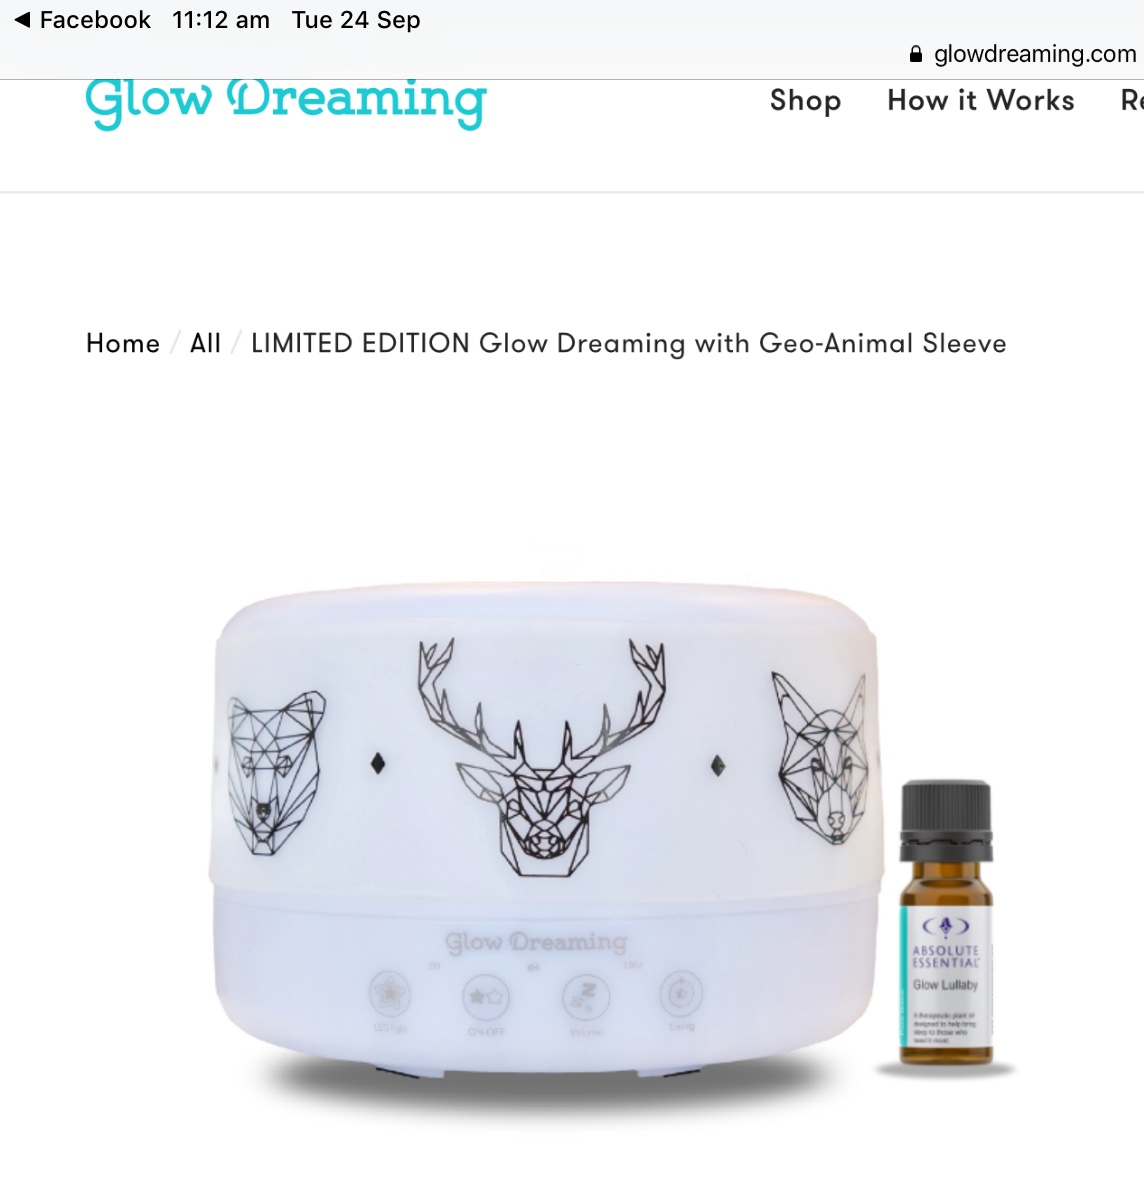 Glow Dreaming humidifier-aromatherapy-nightlight-sounds